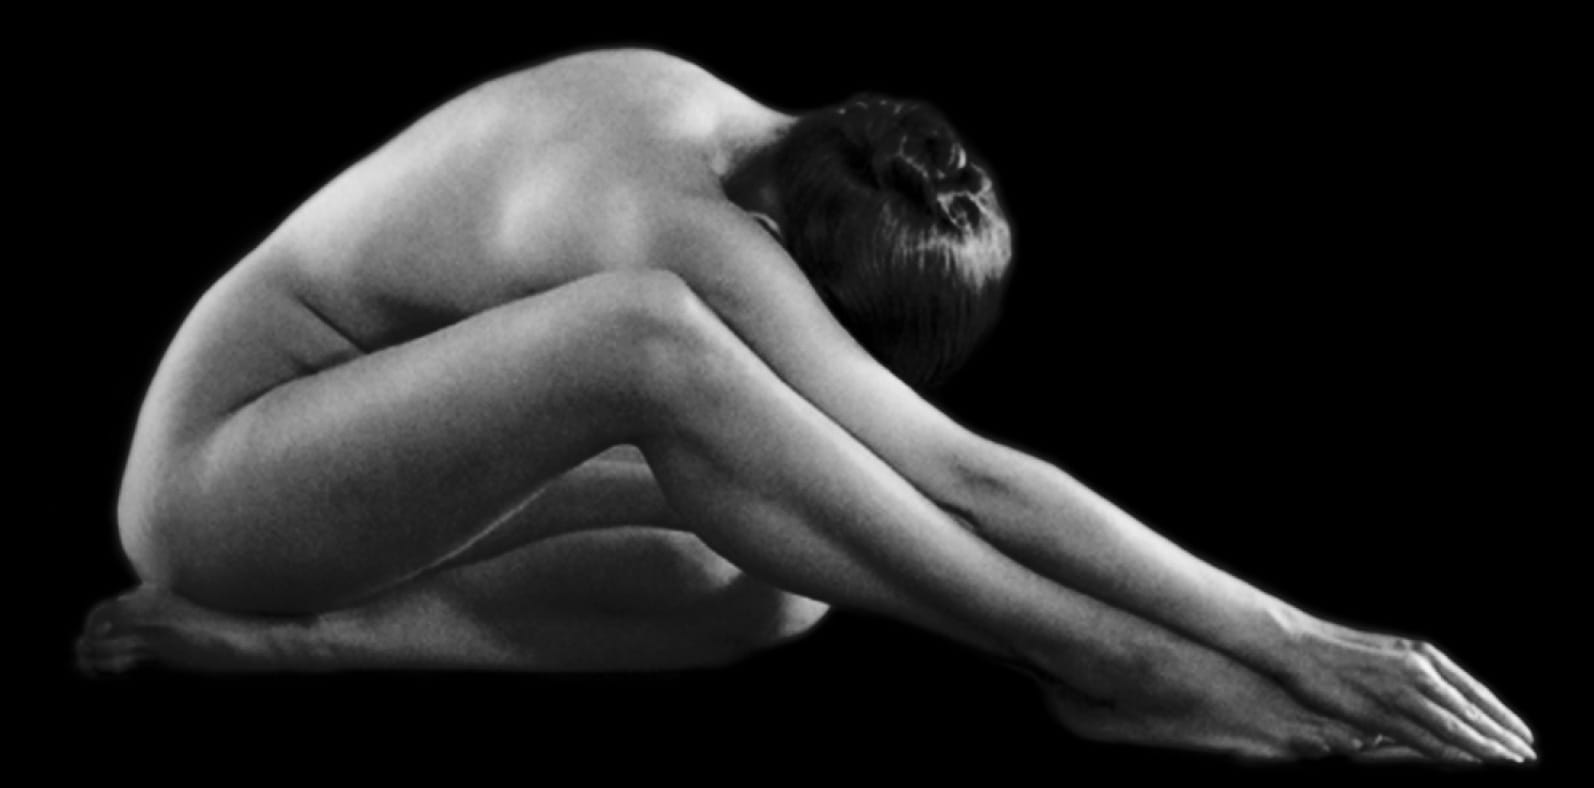 Naked woman sitting down while reaching for her feet with her hands